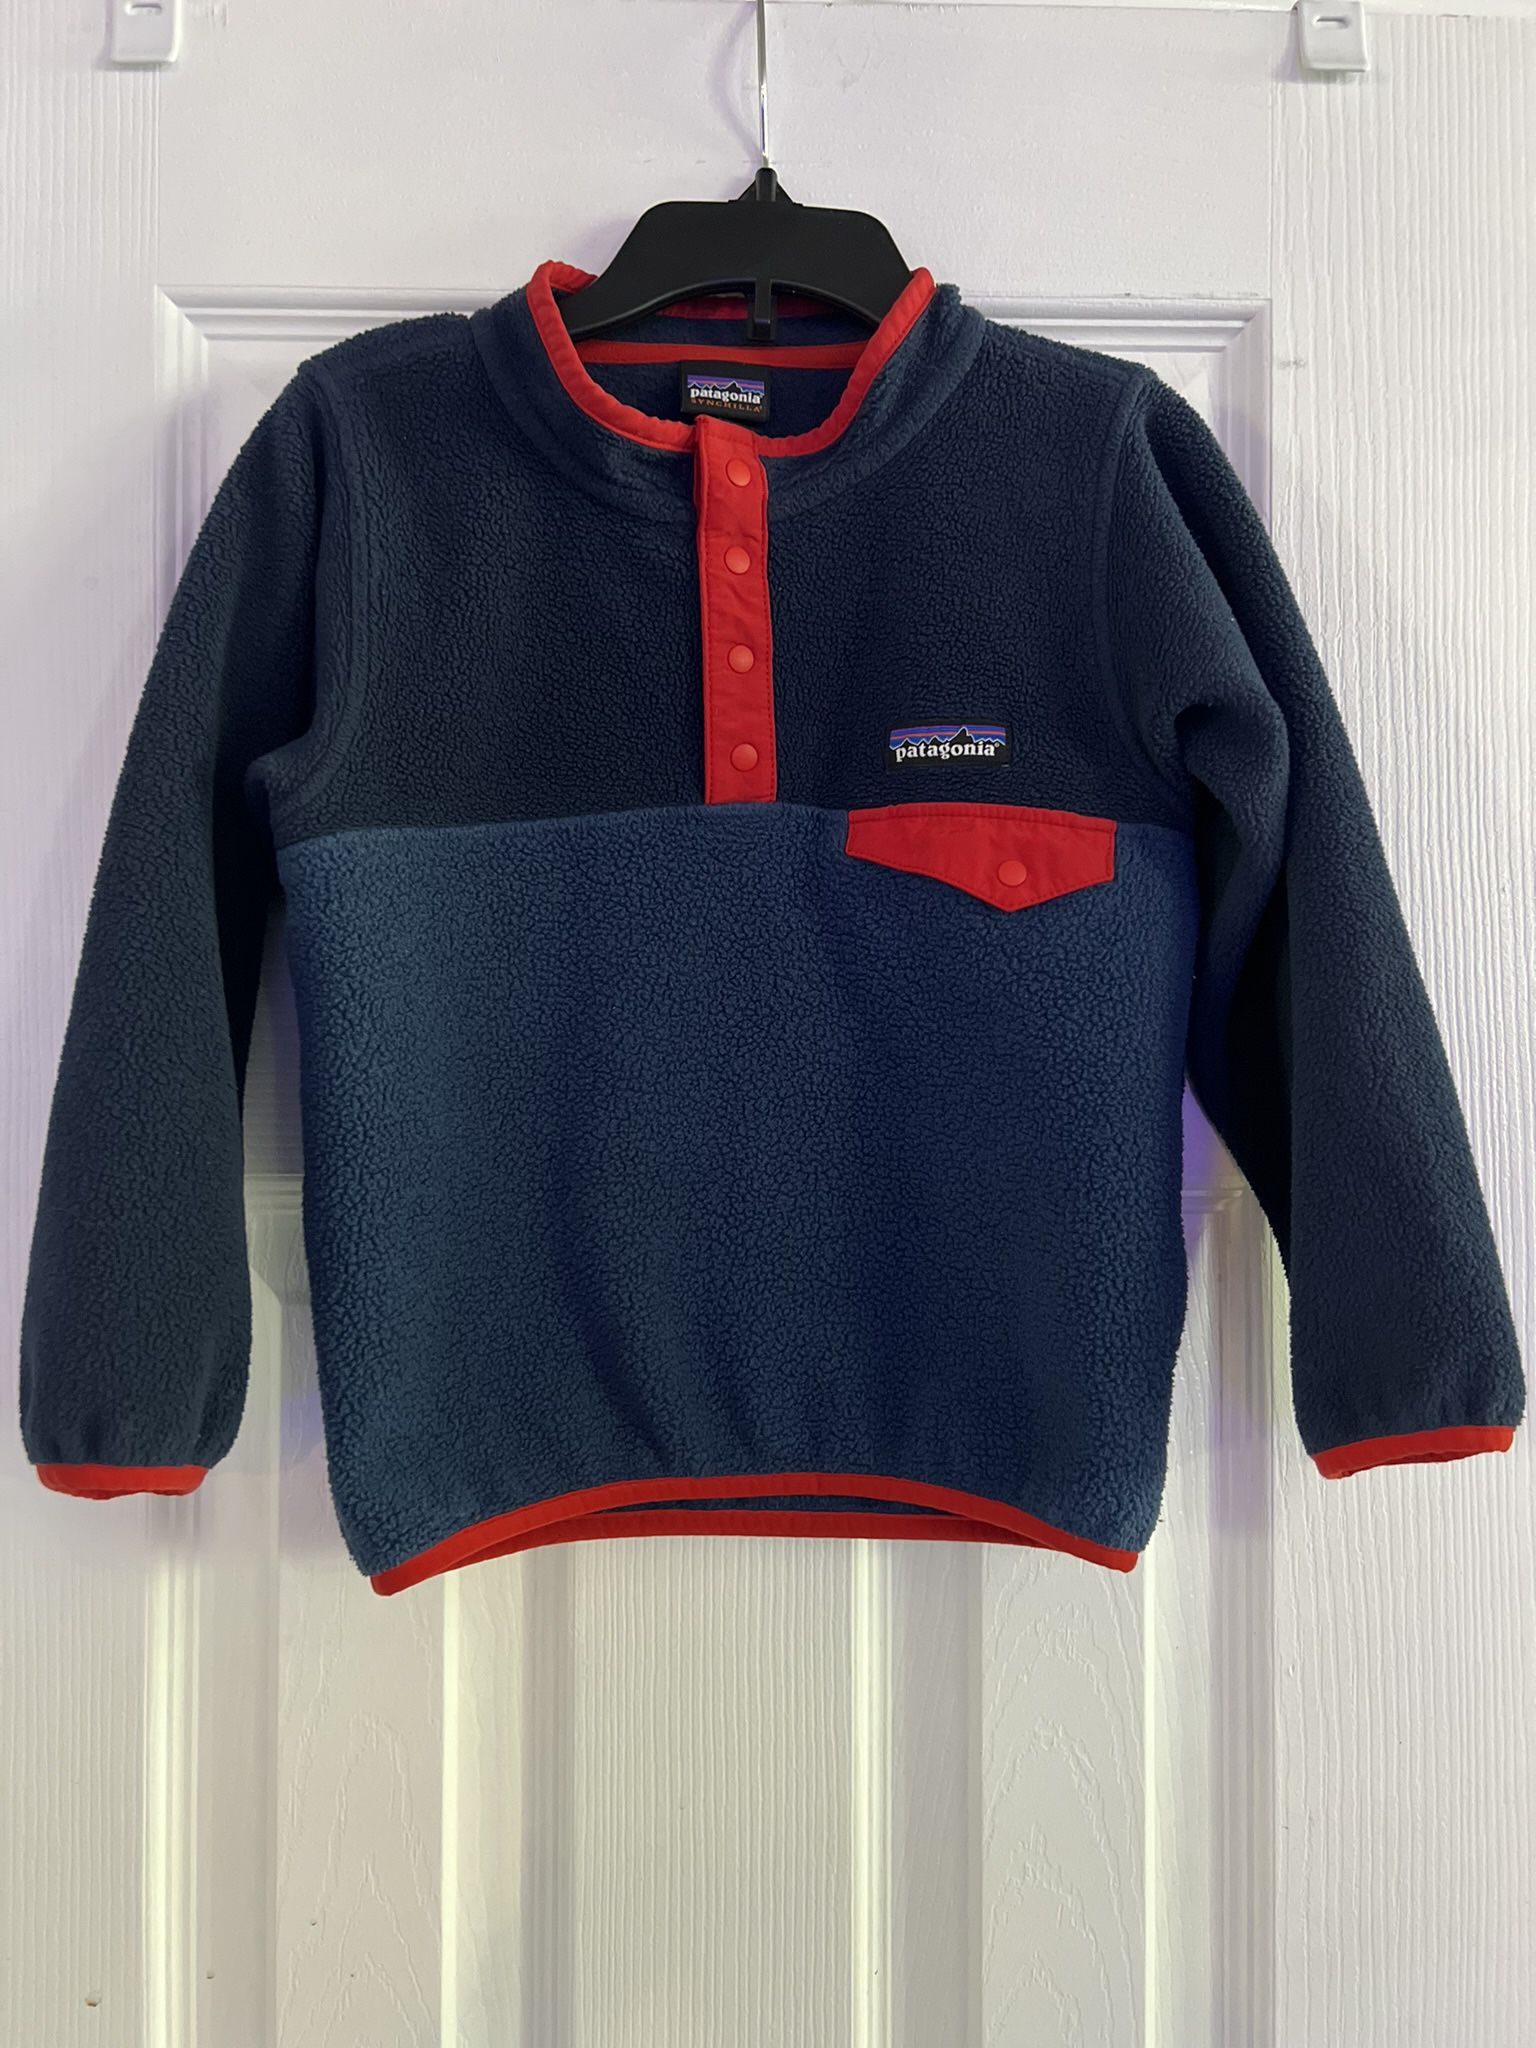 PATAGONIA SNAP Pull over size 4T